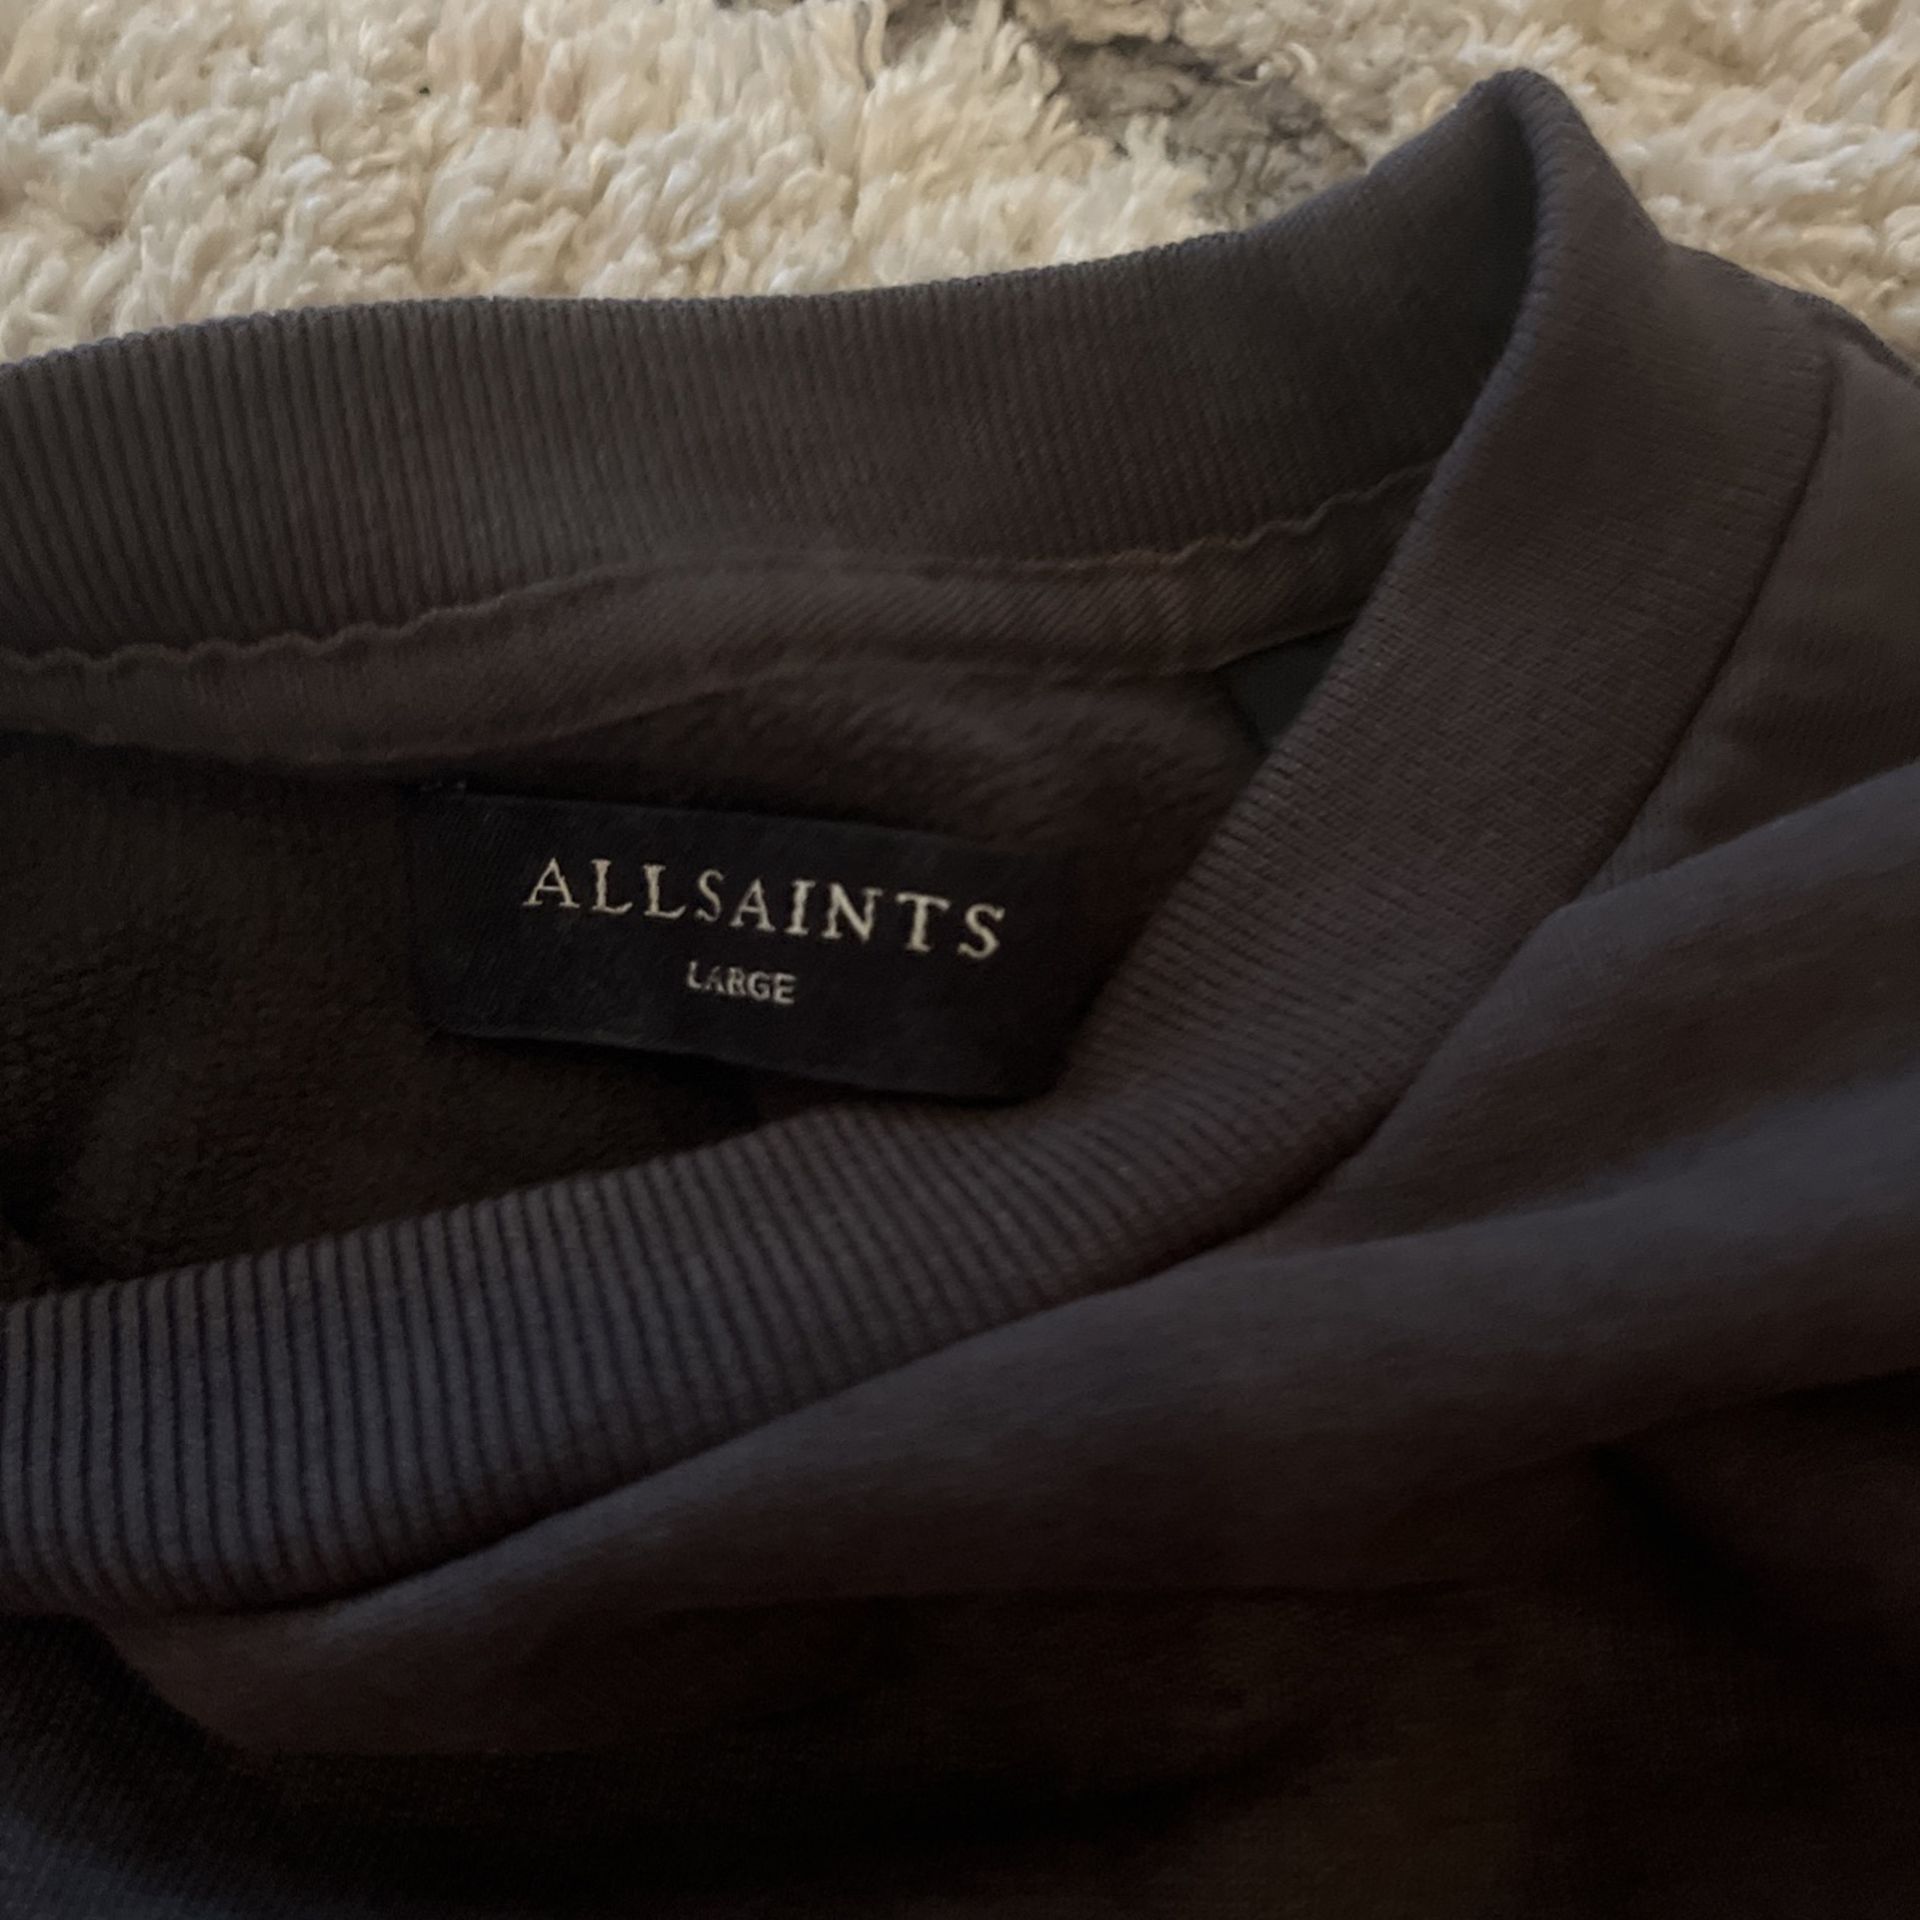 All Saints Sweater for Sale in Chula Vista, CA - OfferUp